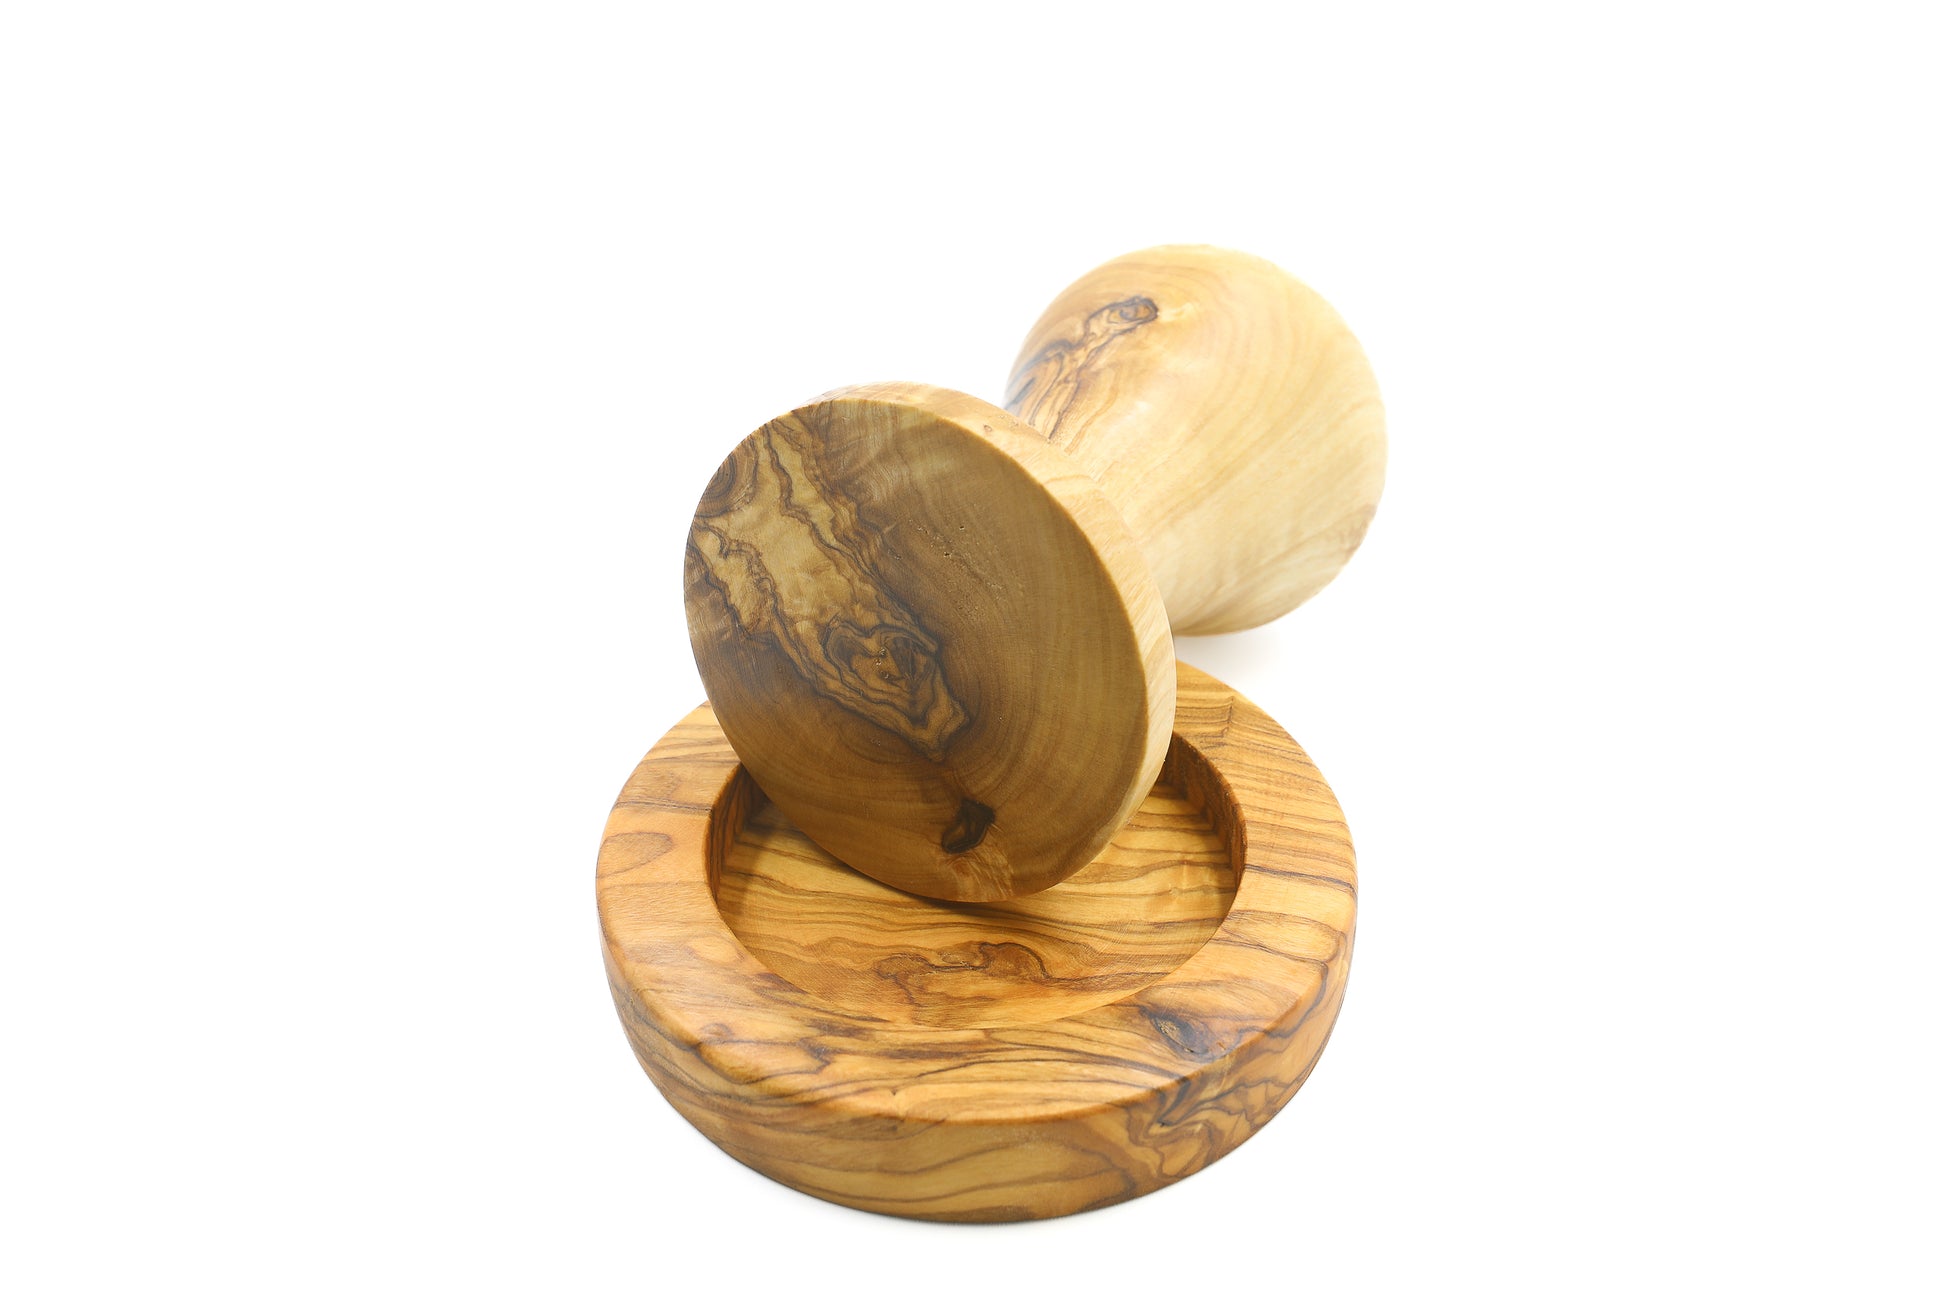 Unique olive wood kitchen tool for perfect espresso, including a tamper with a holder, a unibody presser